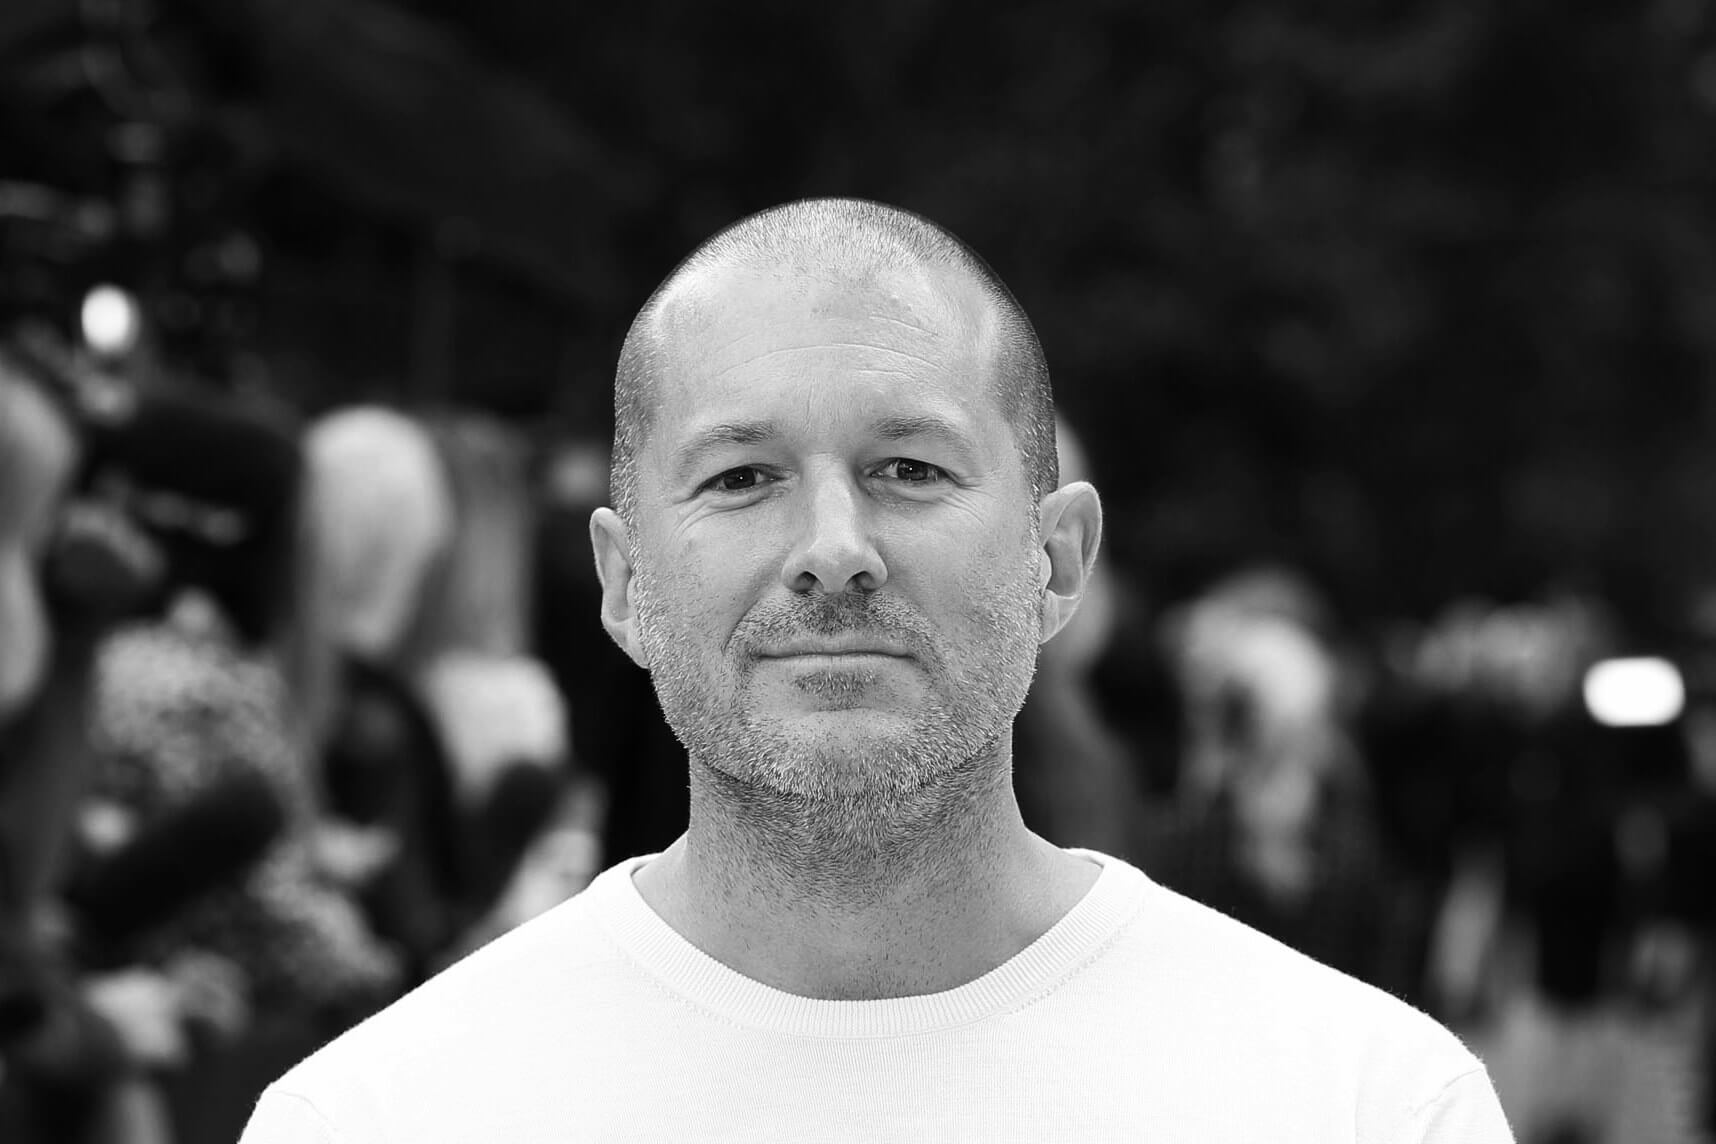 Apple says goodbye to design chief Jony Ive after 30 years ...